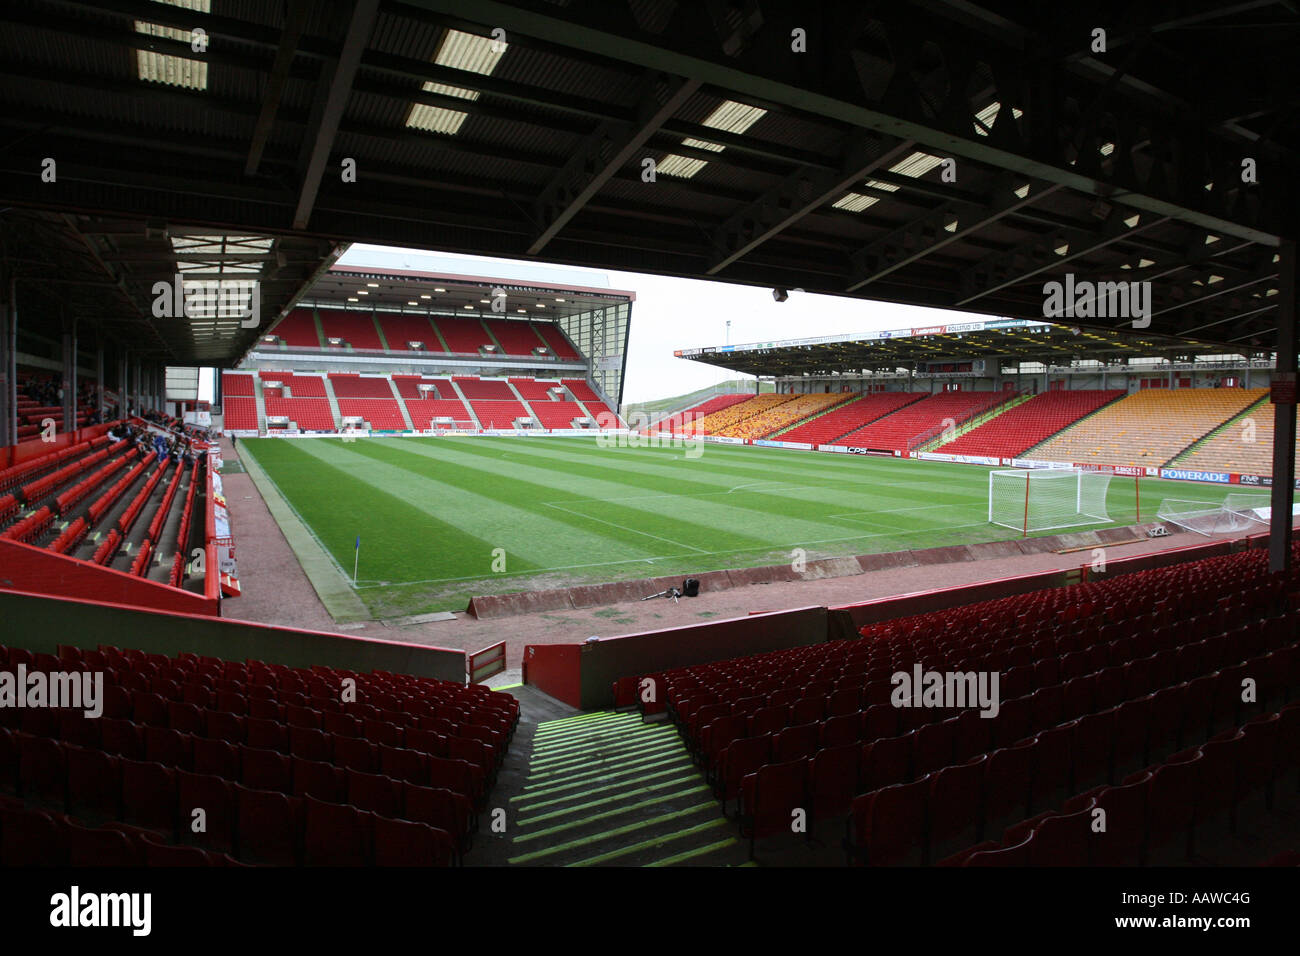 pittodrie-stadium-the-home-ground-of-aberdeen-football-club-in-pittodrie-AAWC4G.jpg